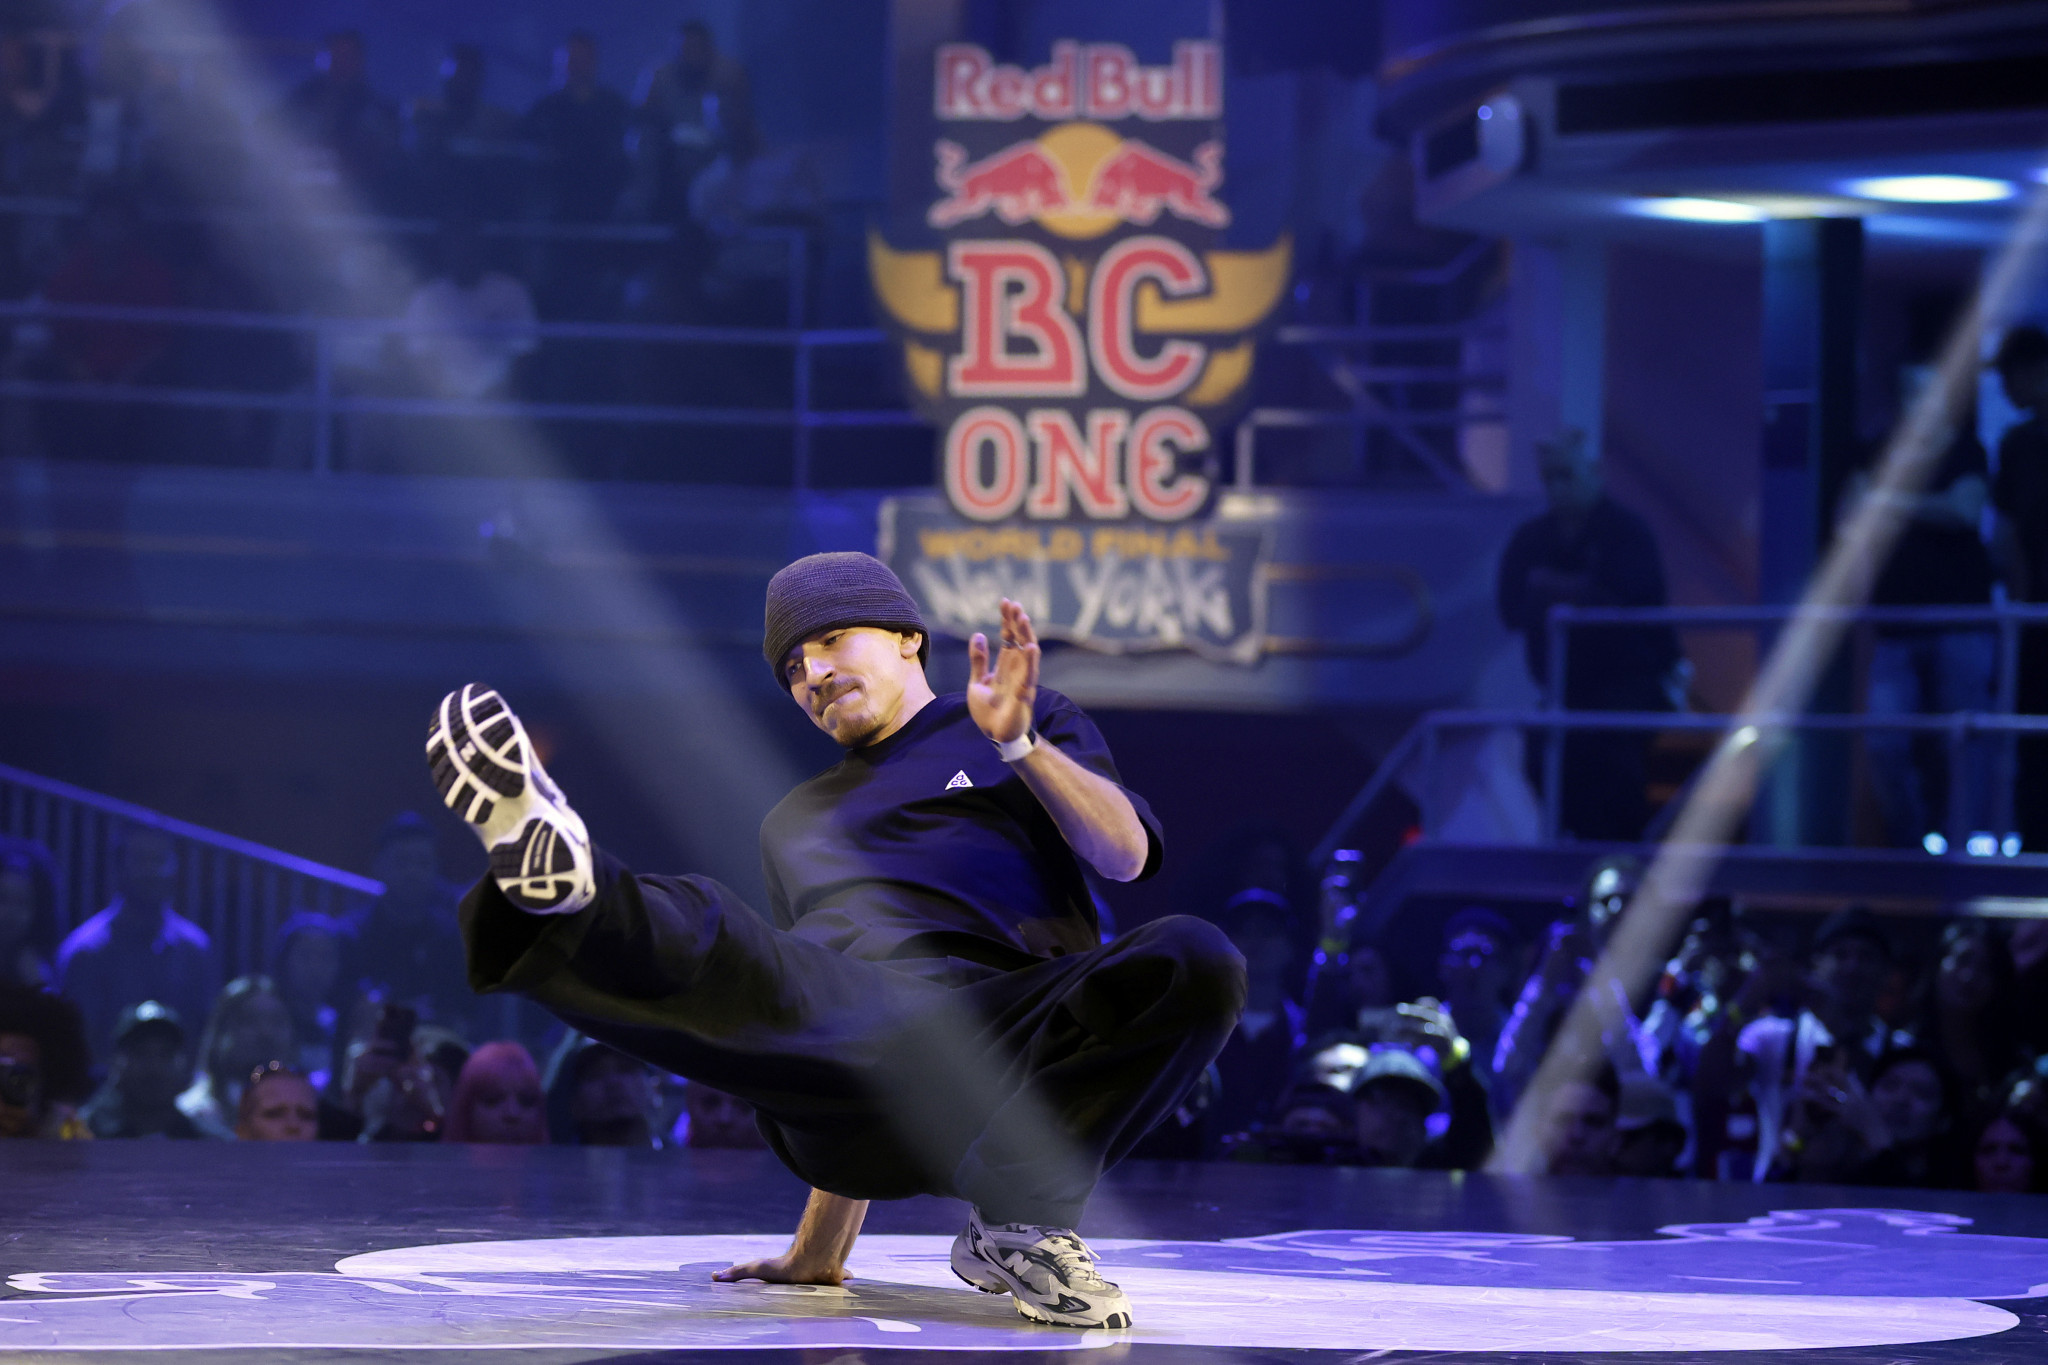 Kazakhstan's Amir Zakirov triumphed in the B-boy competition at the WDSF Breaking for Gold World Series event in Kokura ©Getty Images